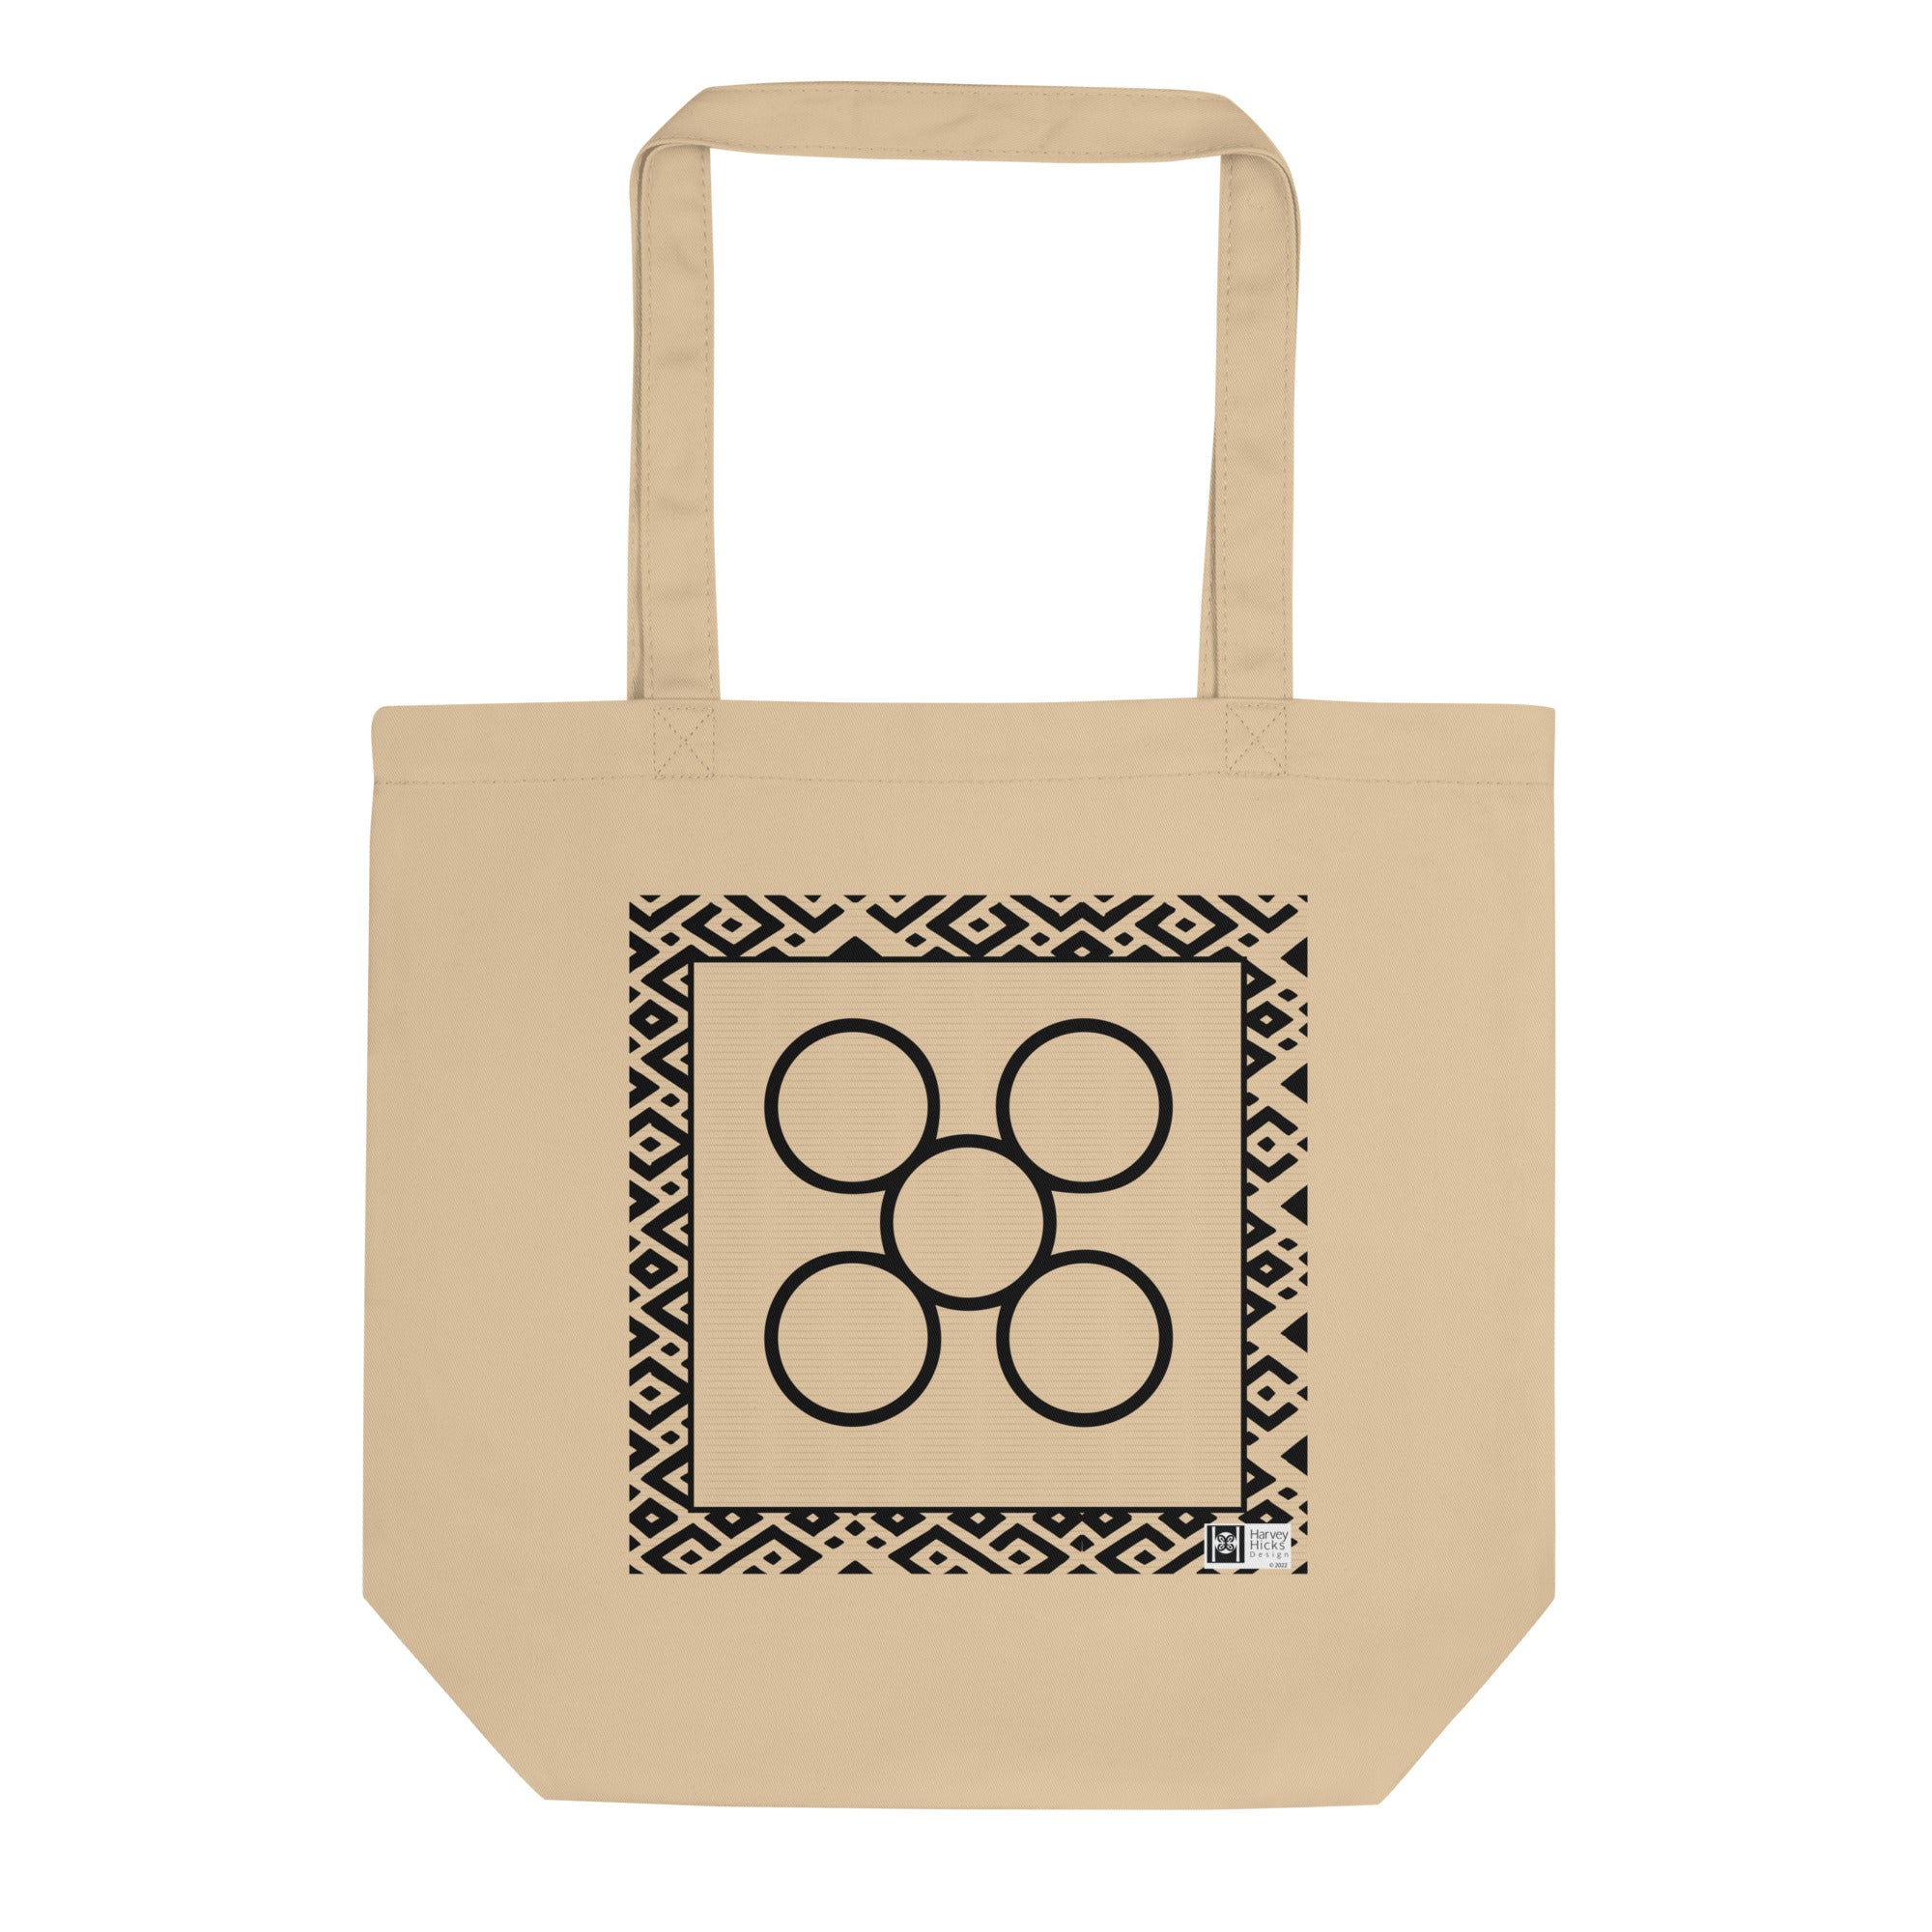 100% cotton Eco Tote Bag, featuring the Adinkra symbol for loyalty, NO TEXT